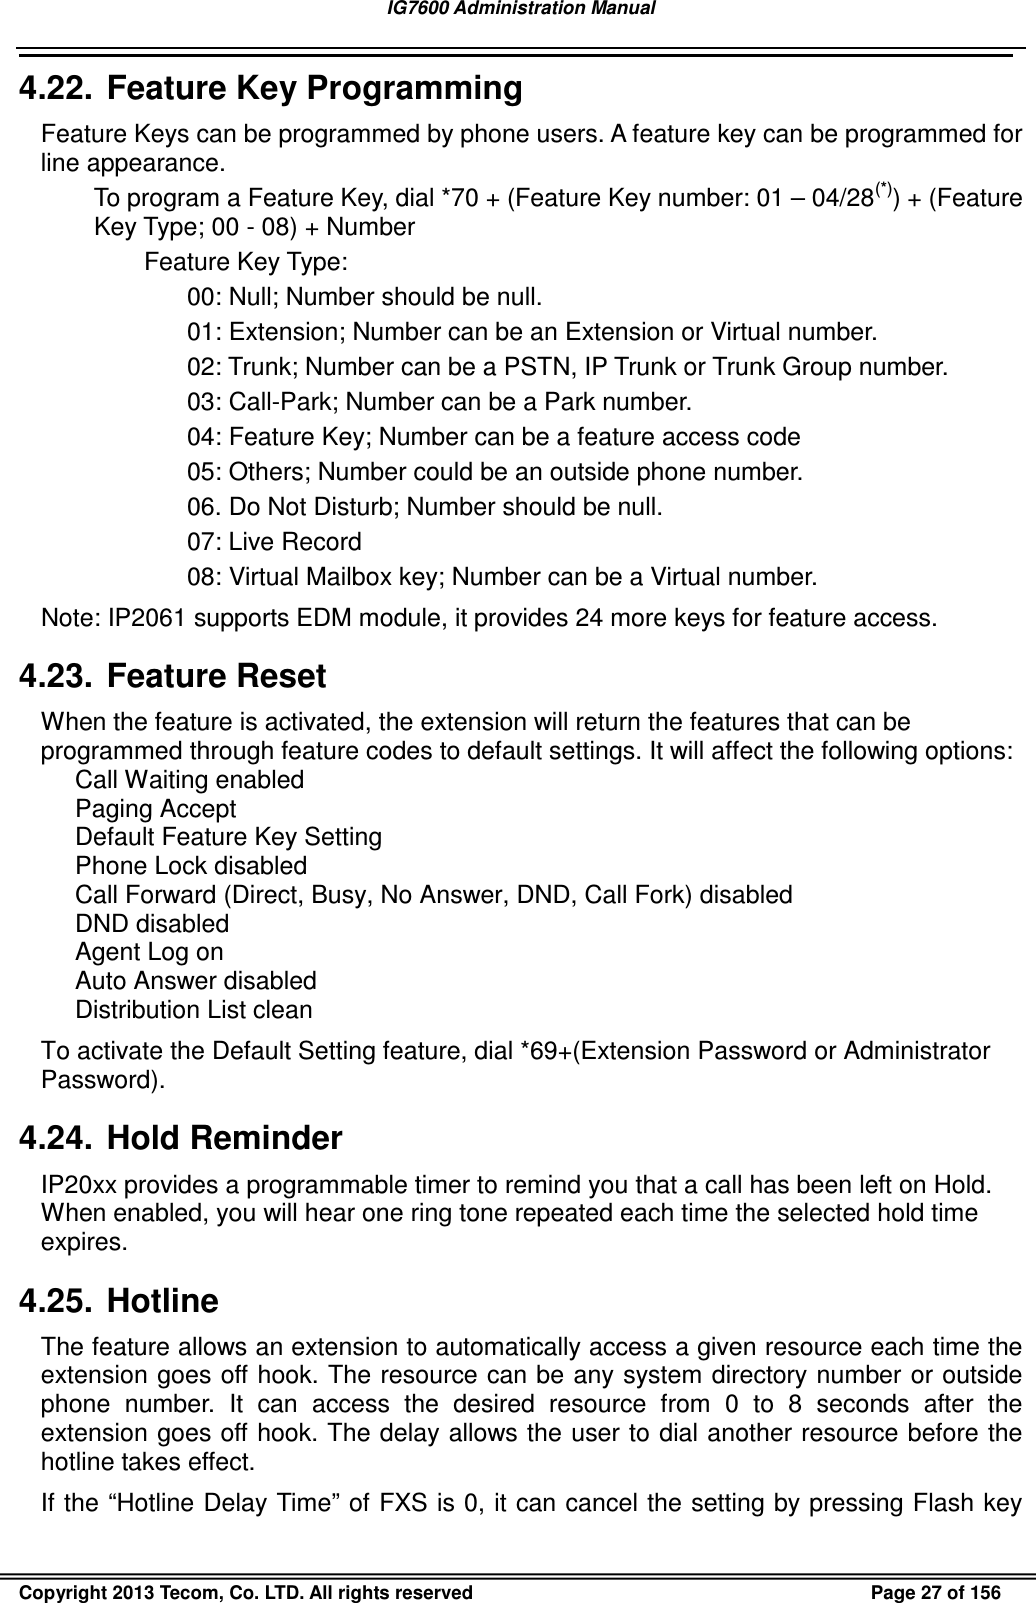 IG7600 Administration Manual                                                                                             Copyright 2013 Tecom, Co. LTD. All rights reserved  Page 27 of 156 4.22.  Feature Key Programming Feature Keys can be programmed by phone users. A feature key can be programmed for line appearance. To program a Feature Key, dial *70 + (Feature Key number: 01 – 04/28(*)) + (Feature Key Type; 00 - 08) + Number Feature Key Type: 00: Null; Number should be null. 01: Extension; Number can be an Extension or Virtual number. 02: Trunk; Number can be a PSTN, IP Trunk or Trunk Group number. 03: Call-Park; Number can be a Park number. 04: Feature Key; Number can be a feature access code 05: Others; Number could be an outside phone number. 06. Do Not Disturb; Number should be null. 07: Live Record 08: Virtual Mailbox key; Number can be a Virtual number. Note: IP2061 supports EDM module, it provides 24 more keys for feature access. 4.23.  Feature Reset When the feature is activated, the extension will return the features that can be programmed through feature codes to default settings. It will affect the following options: Call Waiting enabled Paging Accept Default Feature Key Setting Phone Lock disabled Call Forward (Direct, Busy, No Answer, DND, Call Fork) disabled DND disabled Agent Log on Auto Answer disabled Distribution List clean To activate the Default Setting feature, dial *69+(Extension Password or Administrator Password). 4.24.  Hold Reminder IP20xx provides a programmable timer to remind you that a call has been left on Hold. When enabled, you will hear one ring tone repeated each time the selected hold time expires. 4.25.  Hotline The feature allows an extension to automatically access a given resource each time the extension goes off hook. The resource can be any system directory  number or outside phone  number.  It  can  access  the  desired  resource  from  0  to  8  seconds  after  the extension goes off hook. The delay allows the user to dial another resource before the hotline takes effect. If the “Hotline Delay Time” of FXS is 0, it can cancel the setting by pressing Flash key 